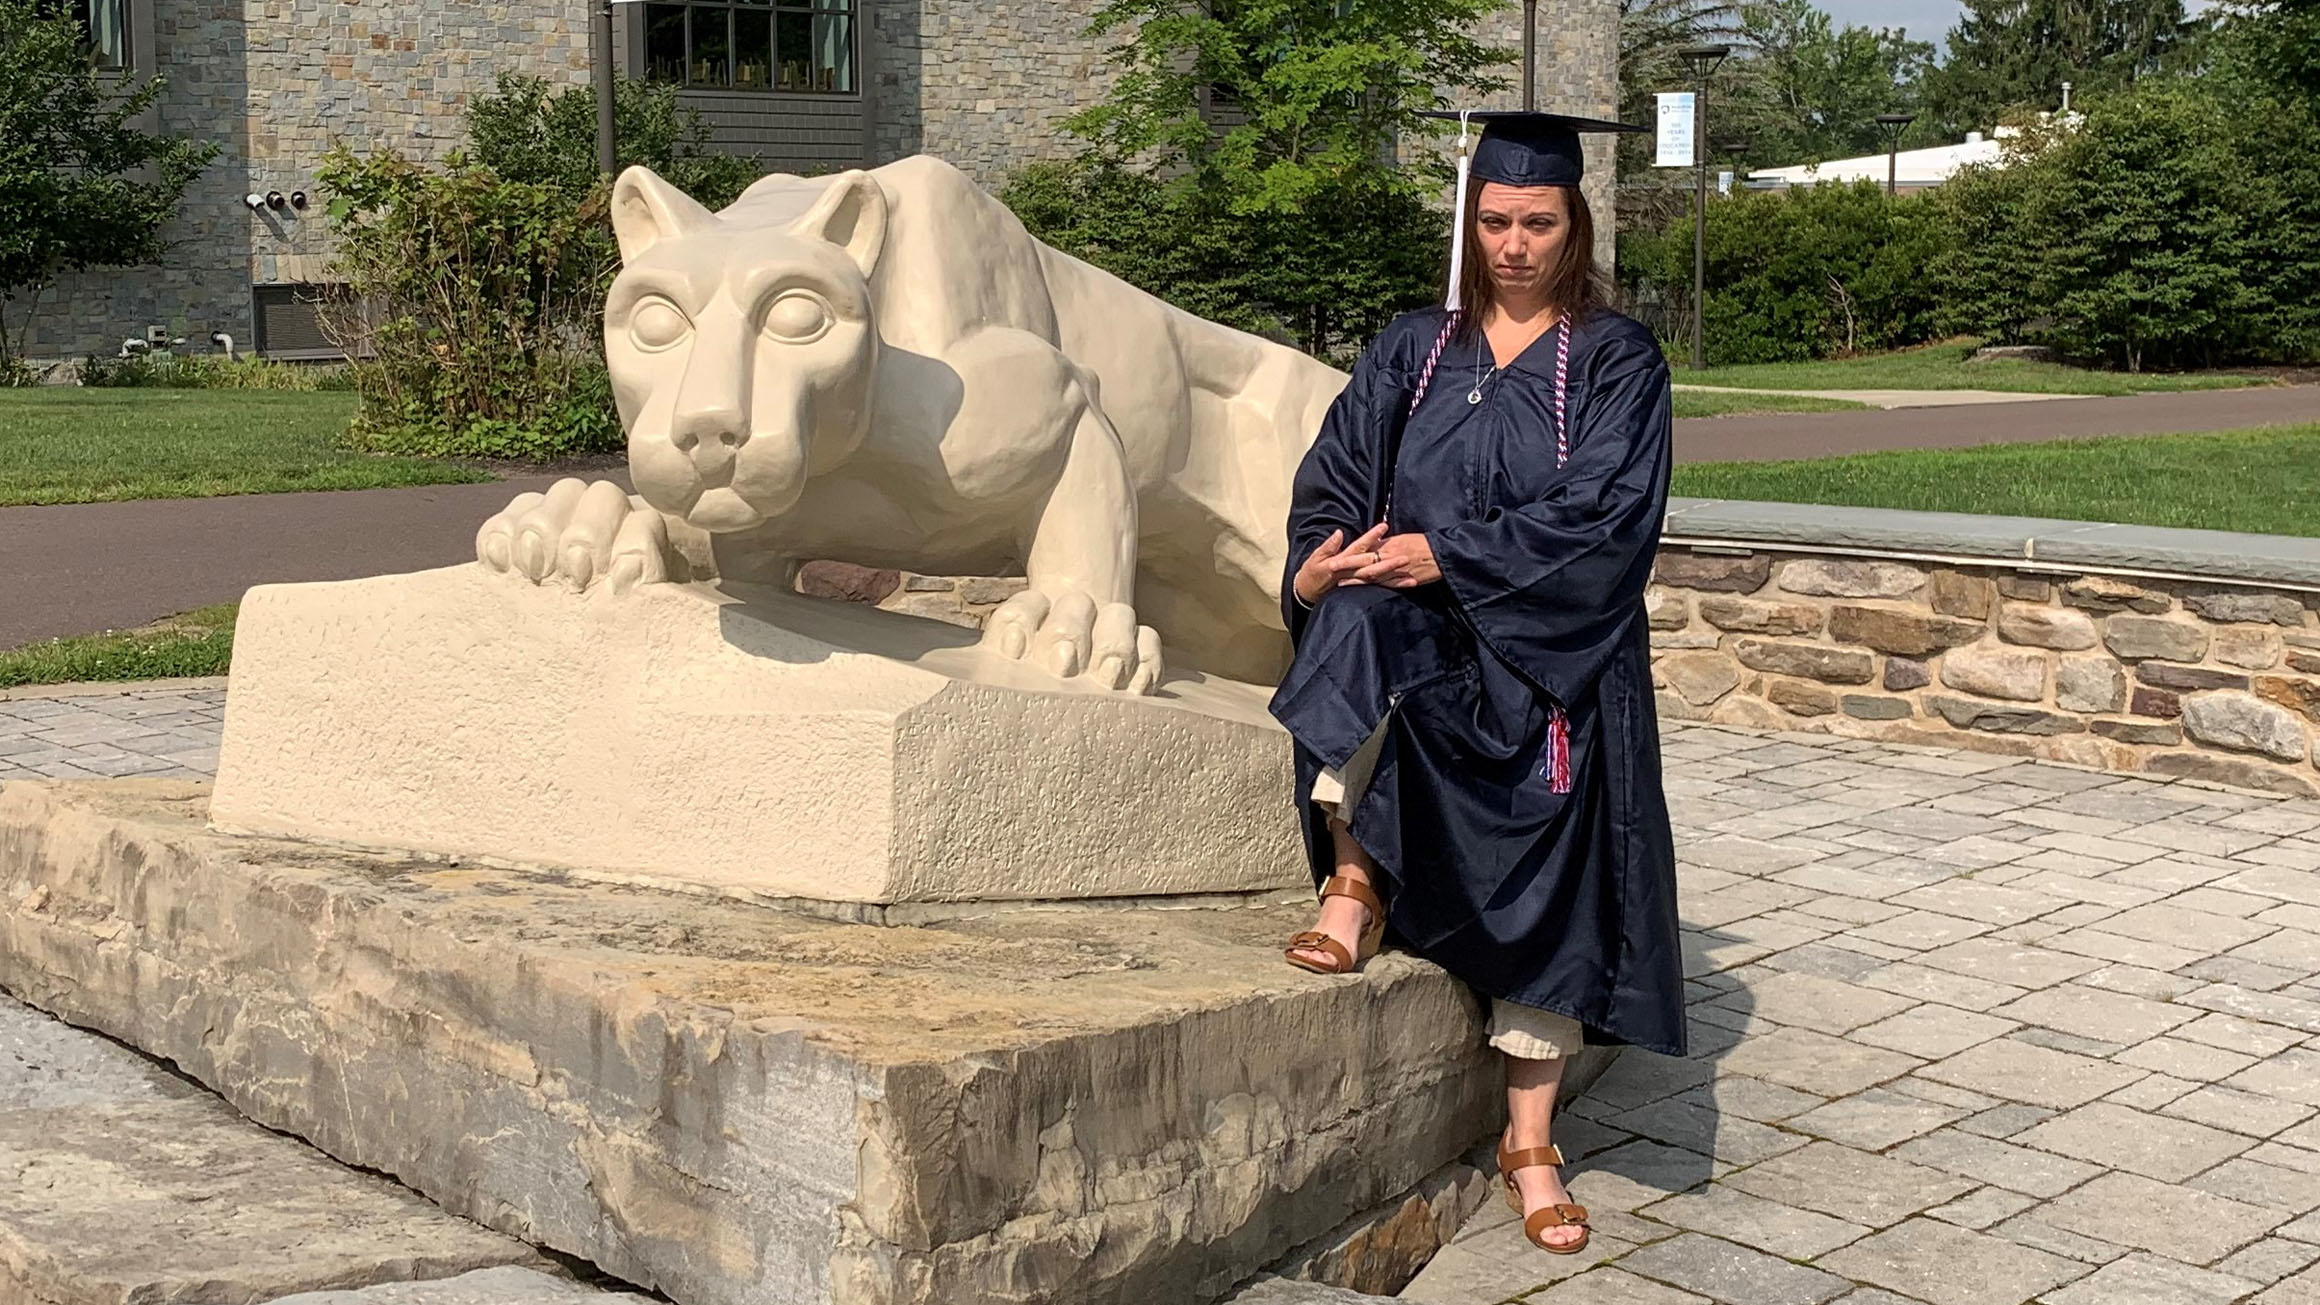 Jessica Butler is wearing a Penn State cap and gown at a Nittany Lion statue